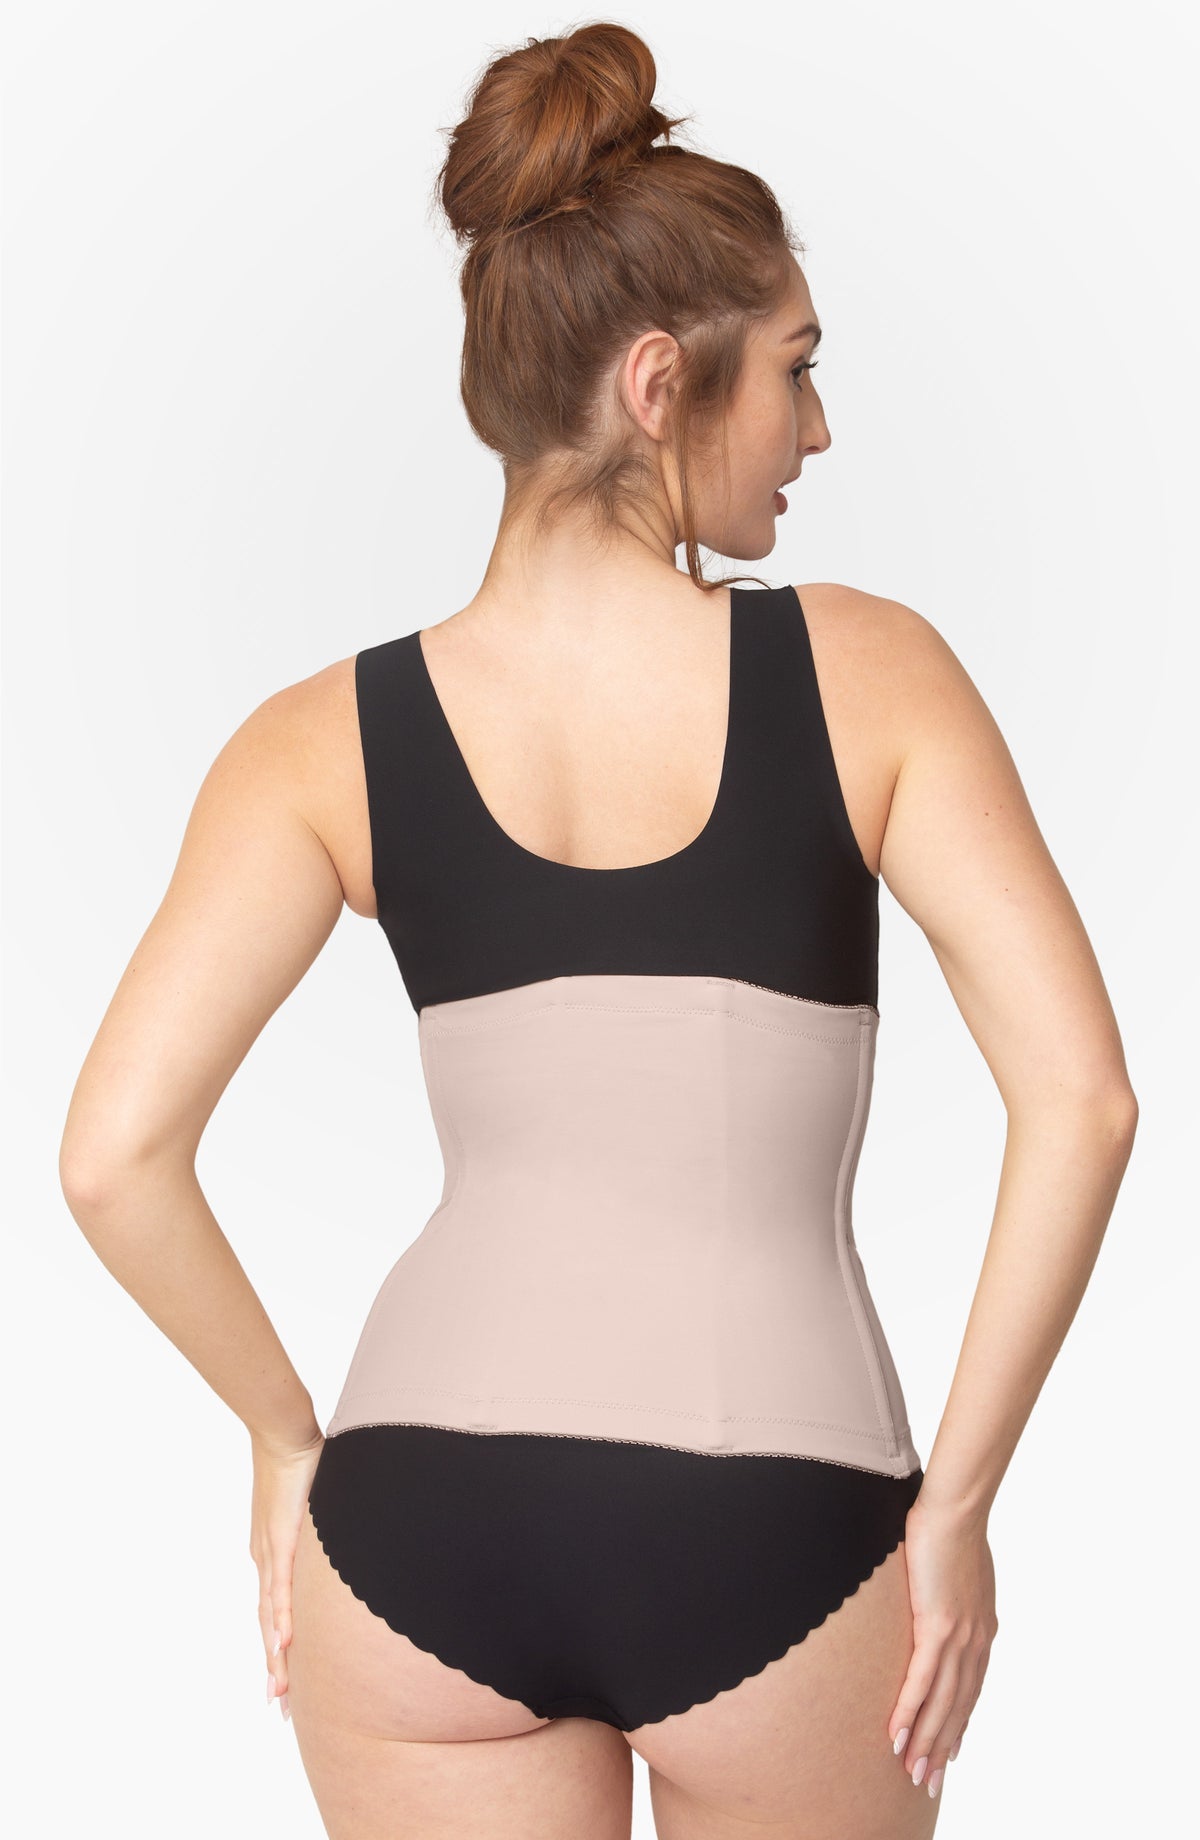 MadamMadame - We heard you, here is the Waist Trainer Corset! Great for  postpartum recovery like Diastasis Recti, giving great support to our core  abdominal muscle, it is what all mothers need!